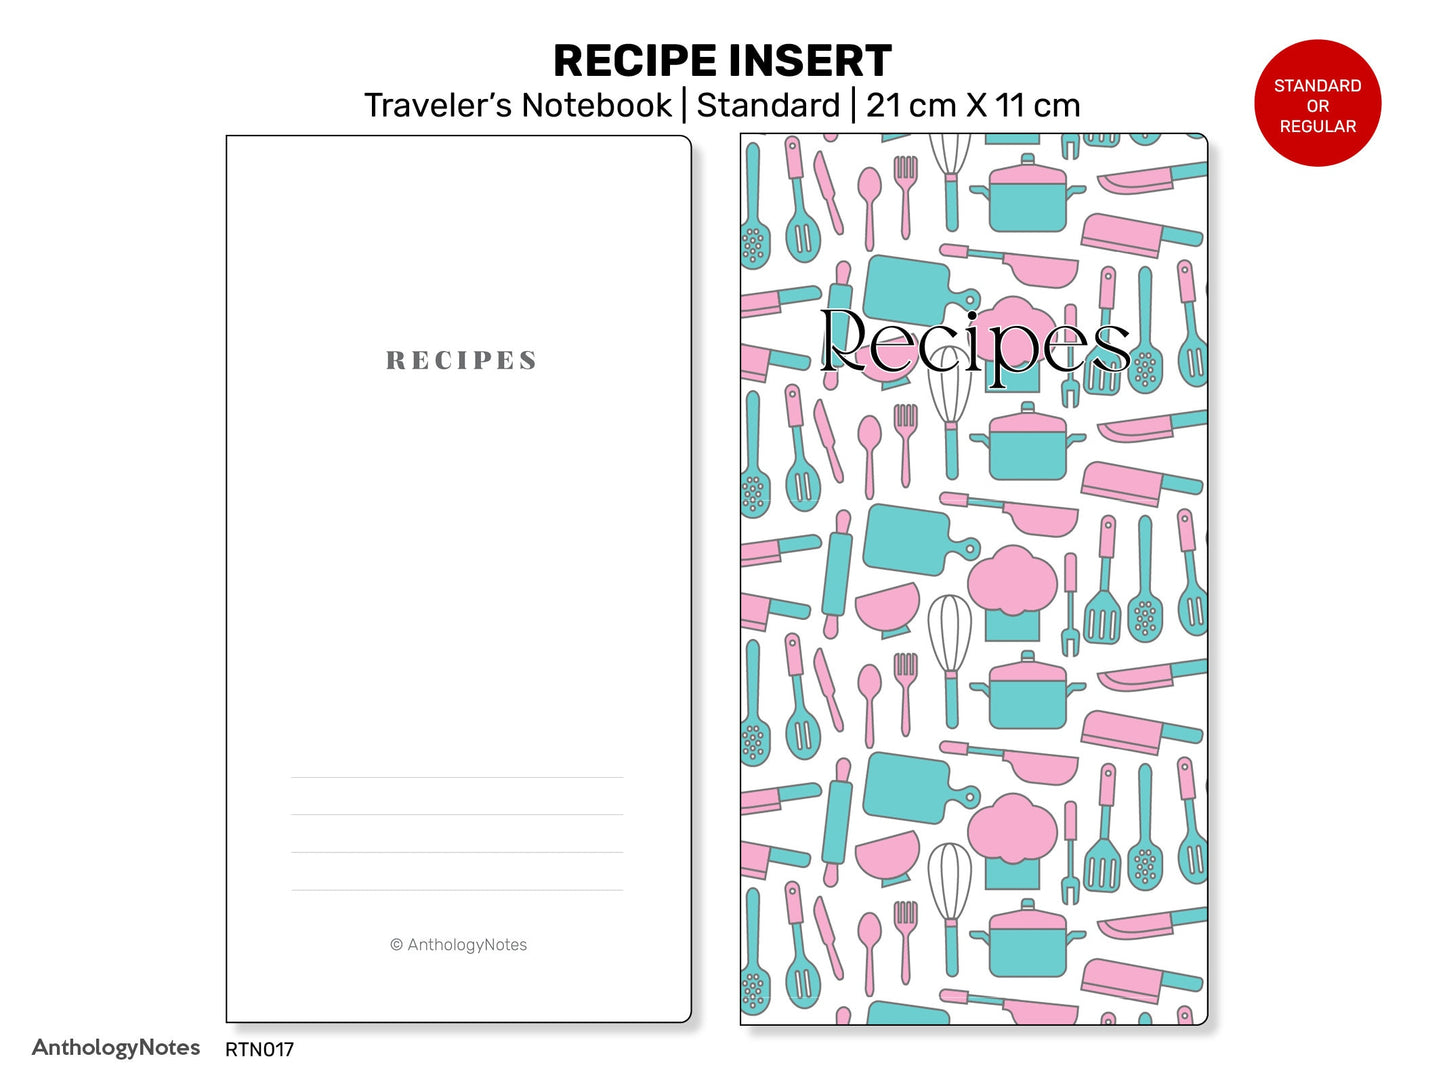 RECIPE Organizer Printable Insert Traveler's Notebook Standard Size With Cooking Measurement Conversion